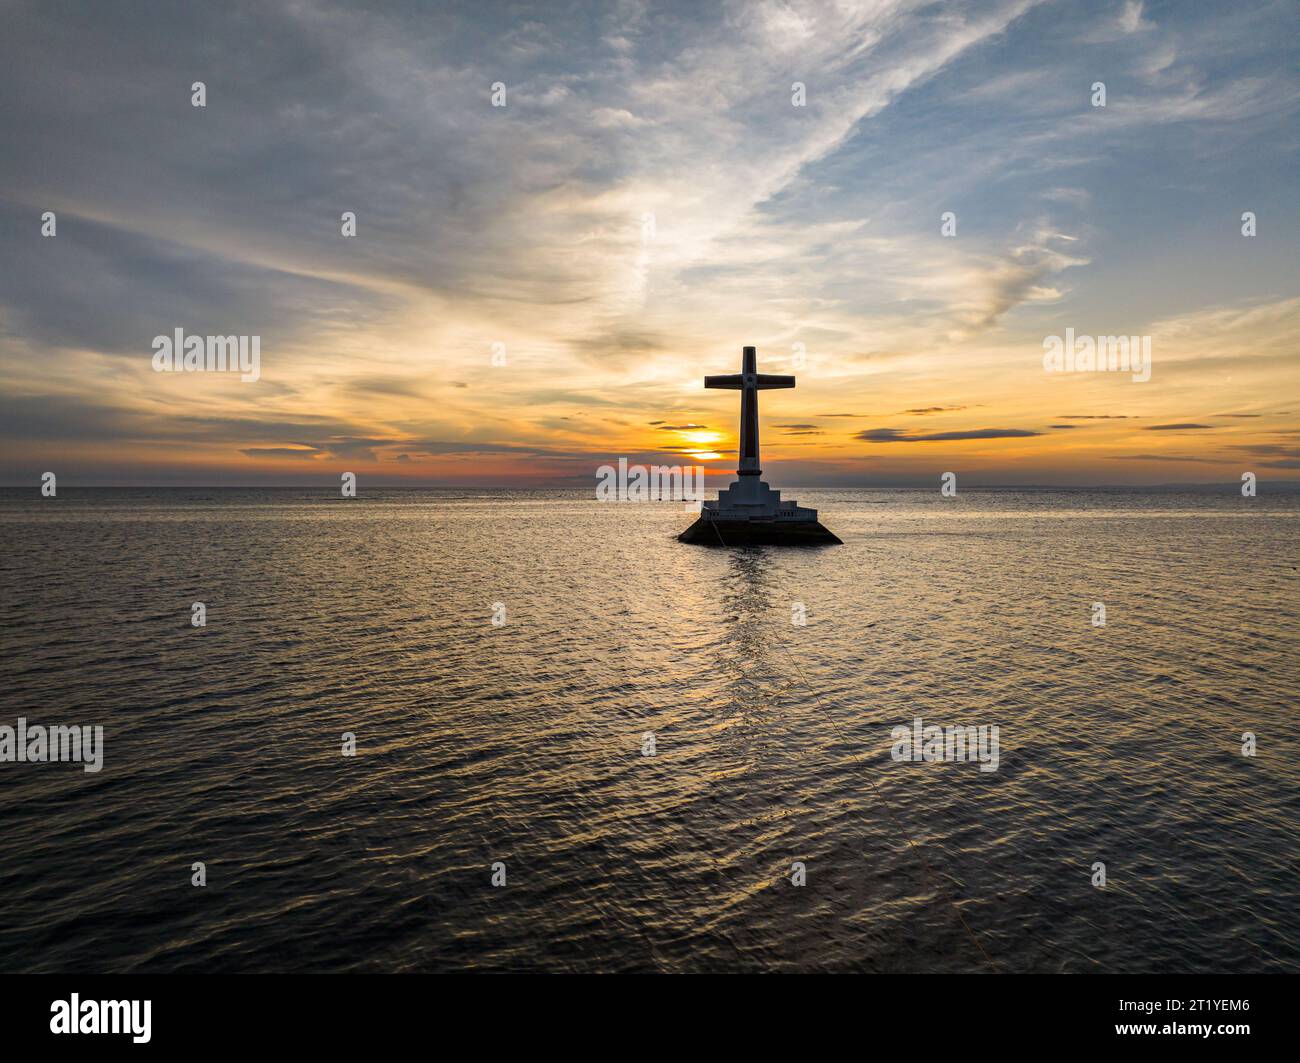 Sunset background on large cross of Sunken Cemetery in Camiguin Island. Philippines. Stock Photo